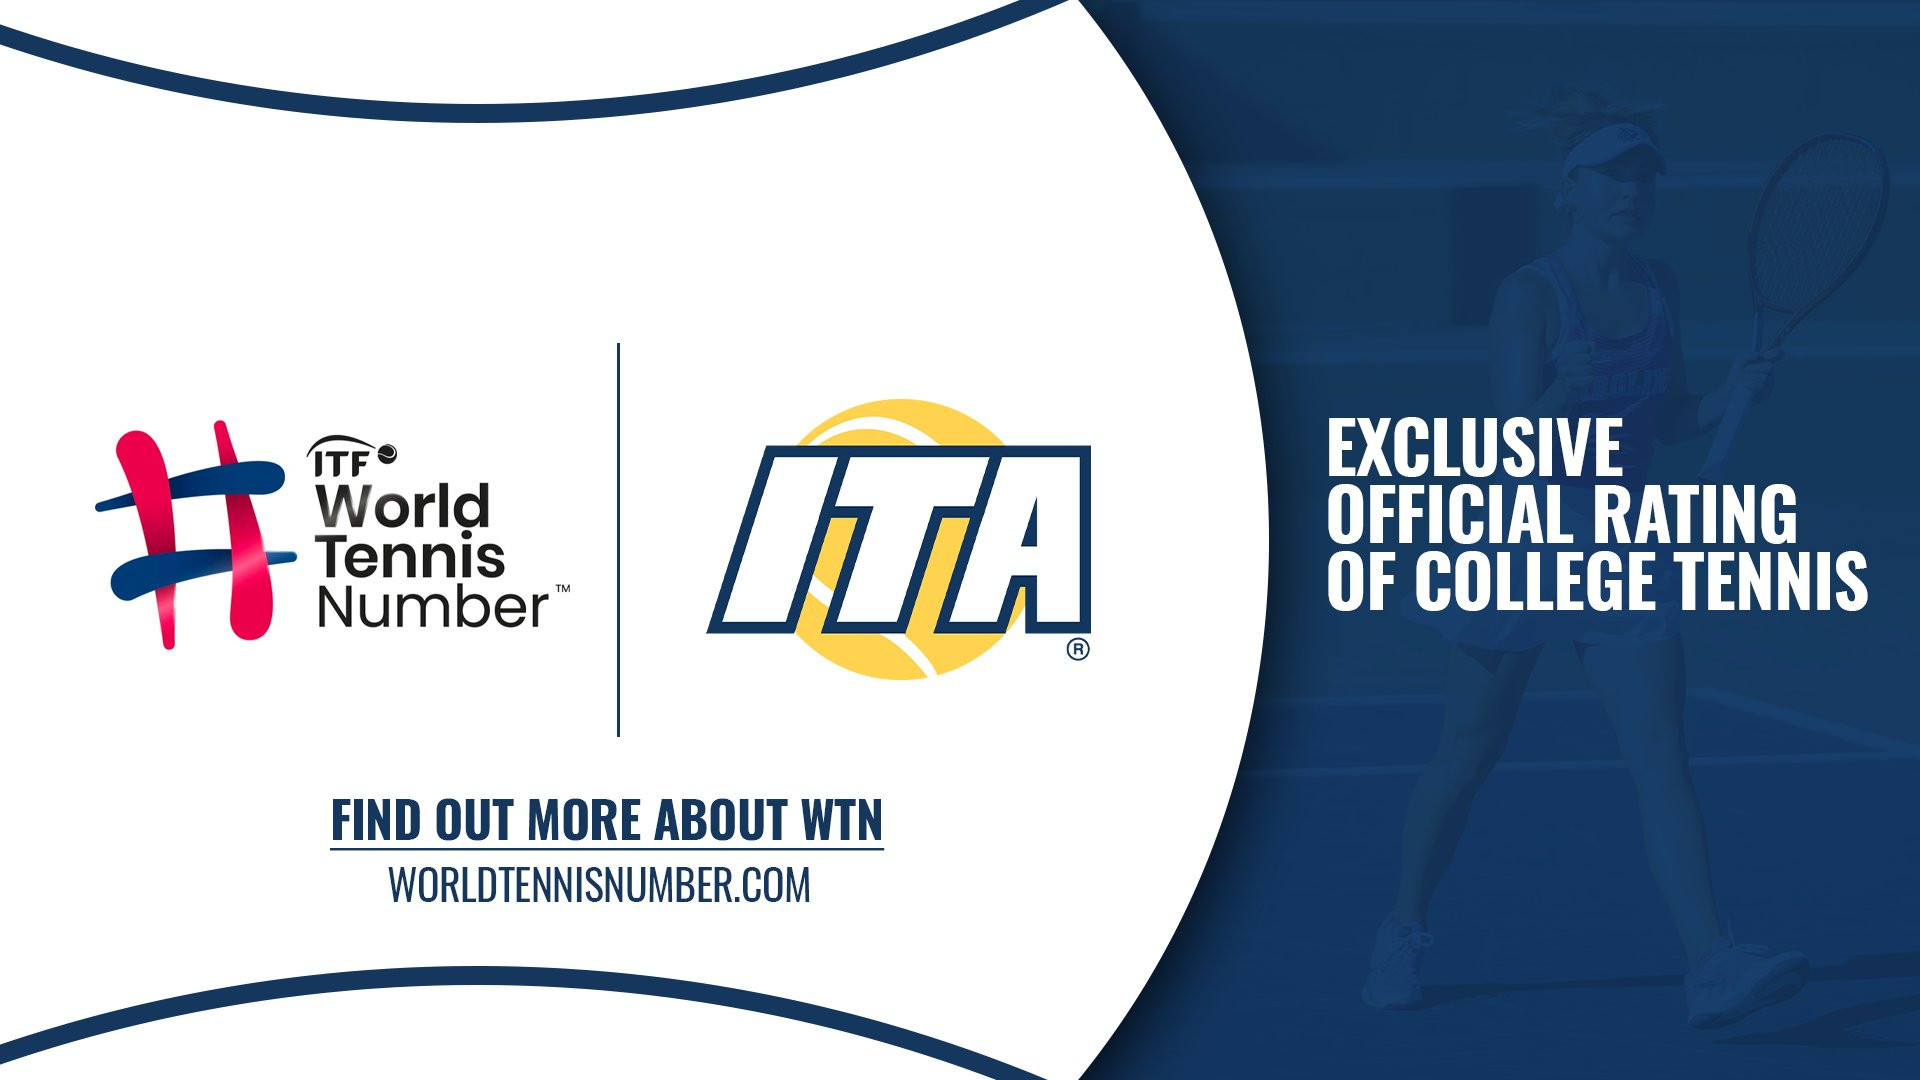  The ITF World Tennis Number is set to provide official rating for the Intercollegiate Tennis Association ©Intercollegiate Tennis Association